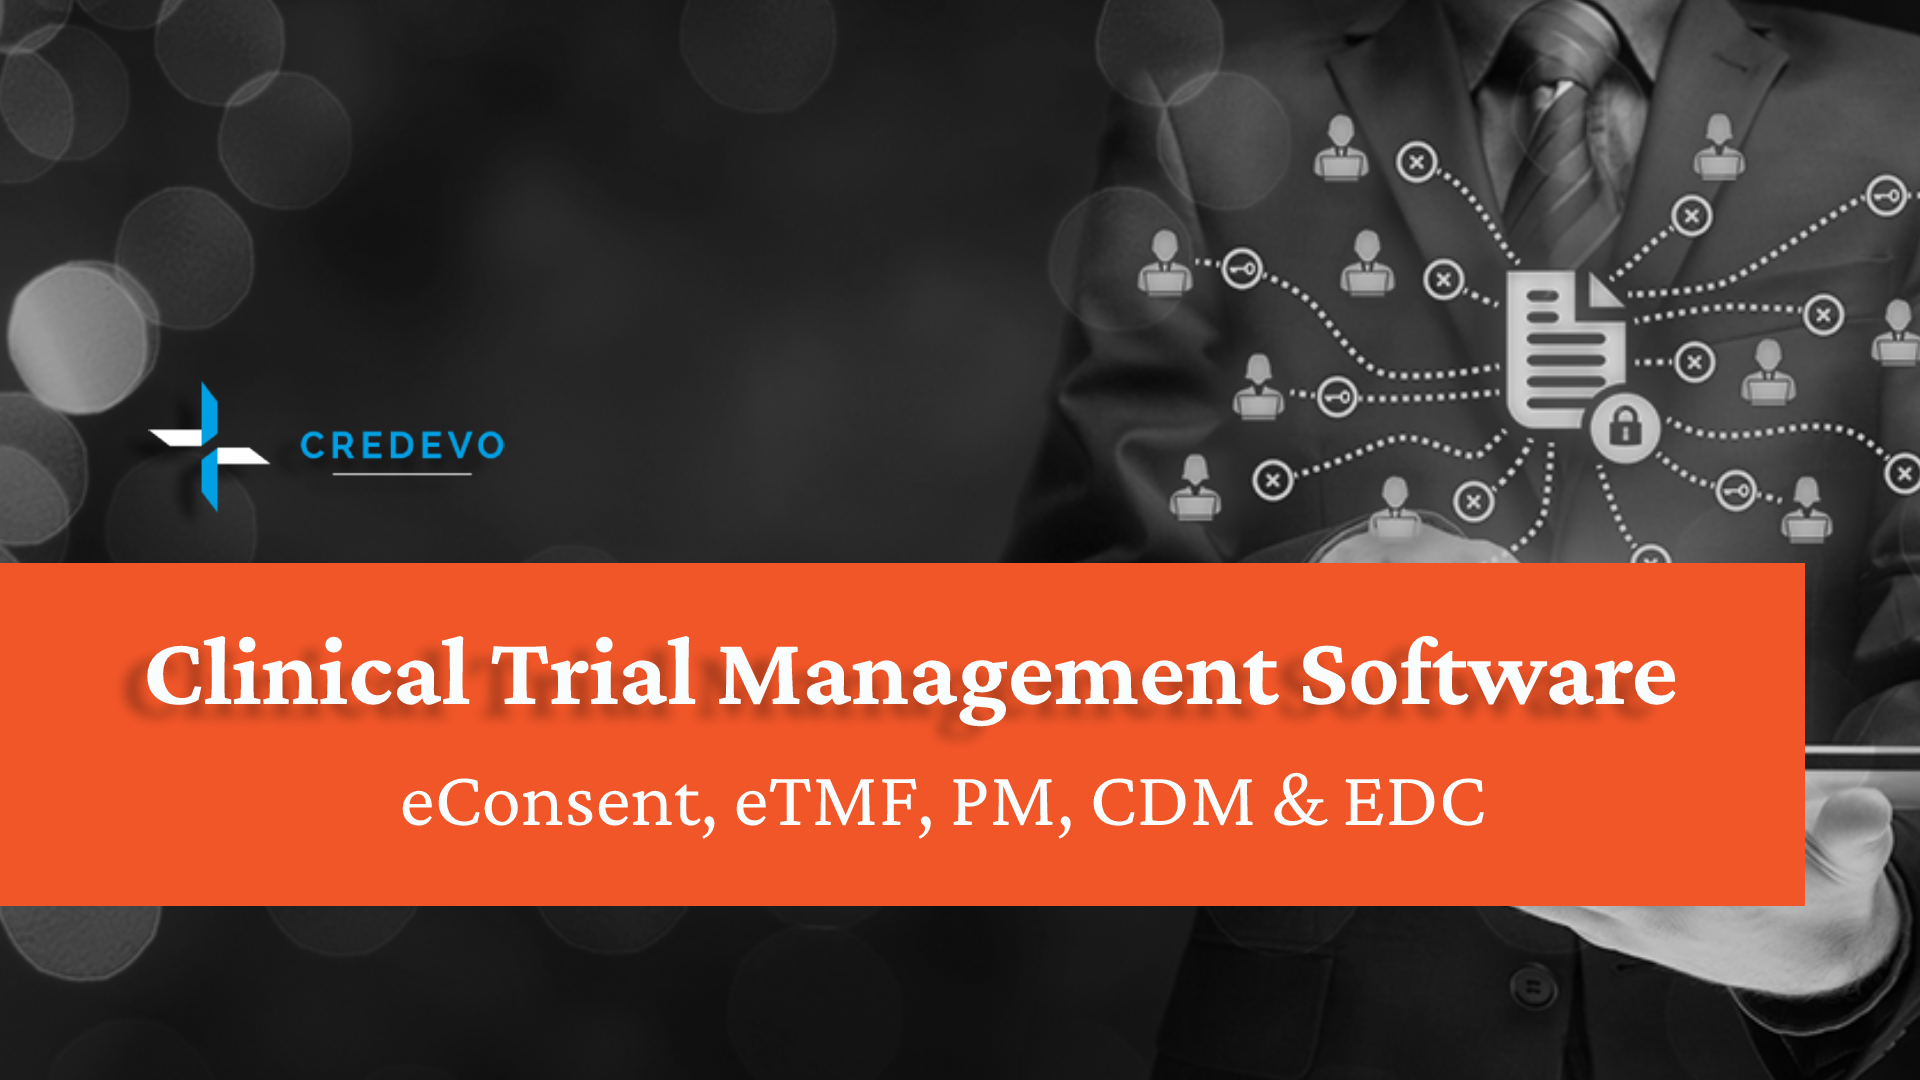 Clinical Trial Management Software Credevo Articles